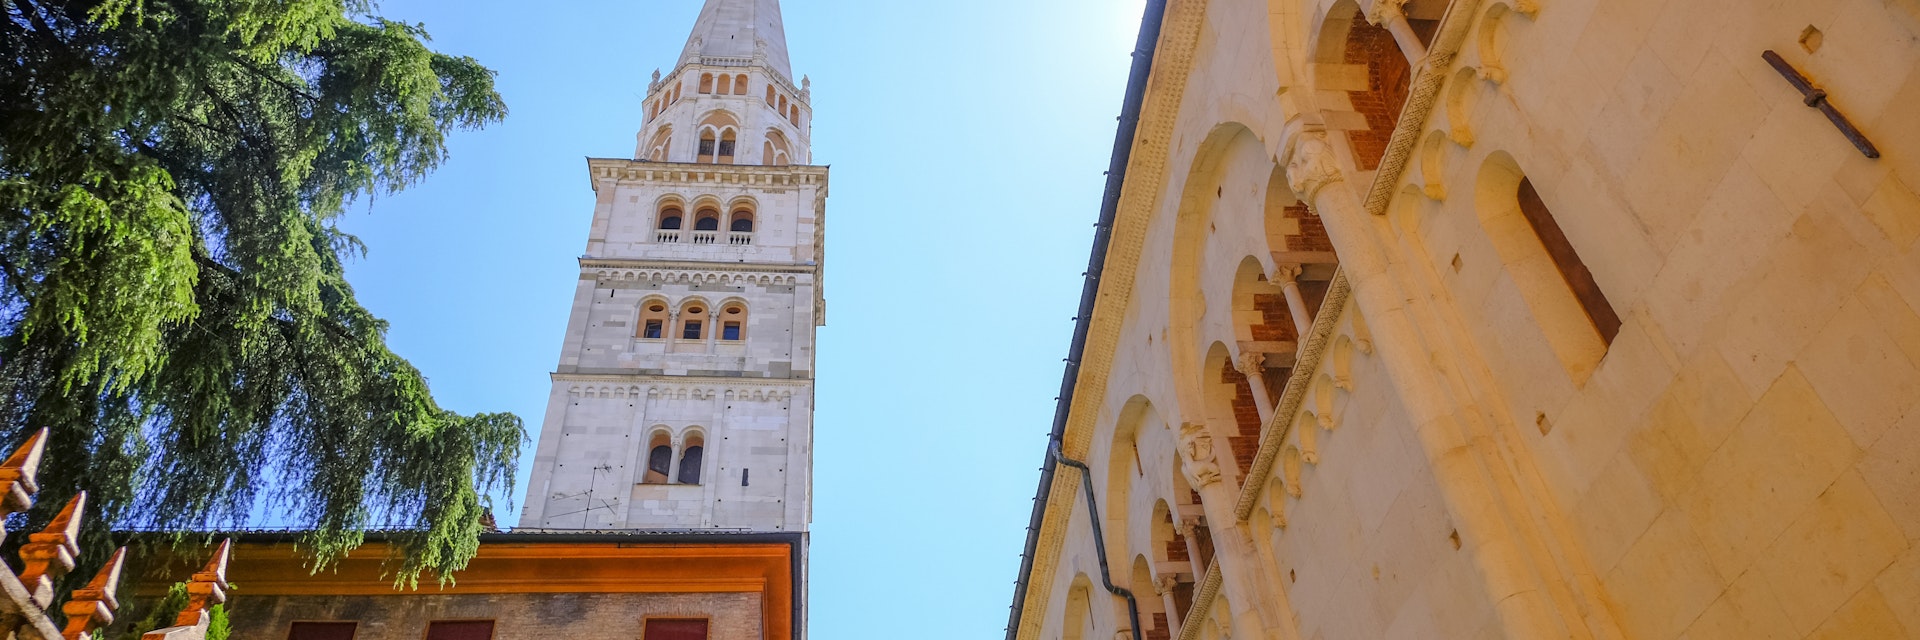 May 2022 Modena, Italy: Tower Ghirlandina and the facade of the Duomo Modena across the blue sky from beneath on the square piazza della Torre on a sunny day
1396874400
la ghirlandina, torre, marble, dome, duomo di modena, from beneath, building, square, piazza della torre, travel destination, blu sky, sunny day, flags, historic, culture, buildings, urban, exterior, stone, view, landmark